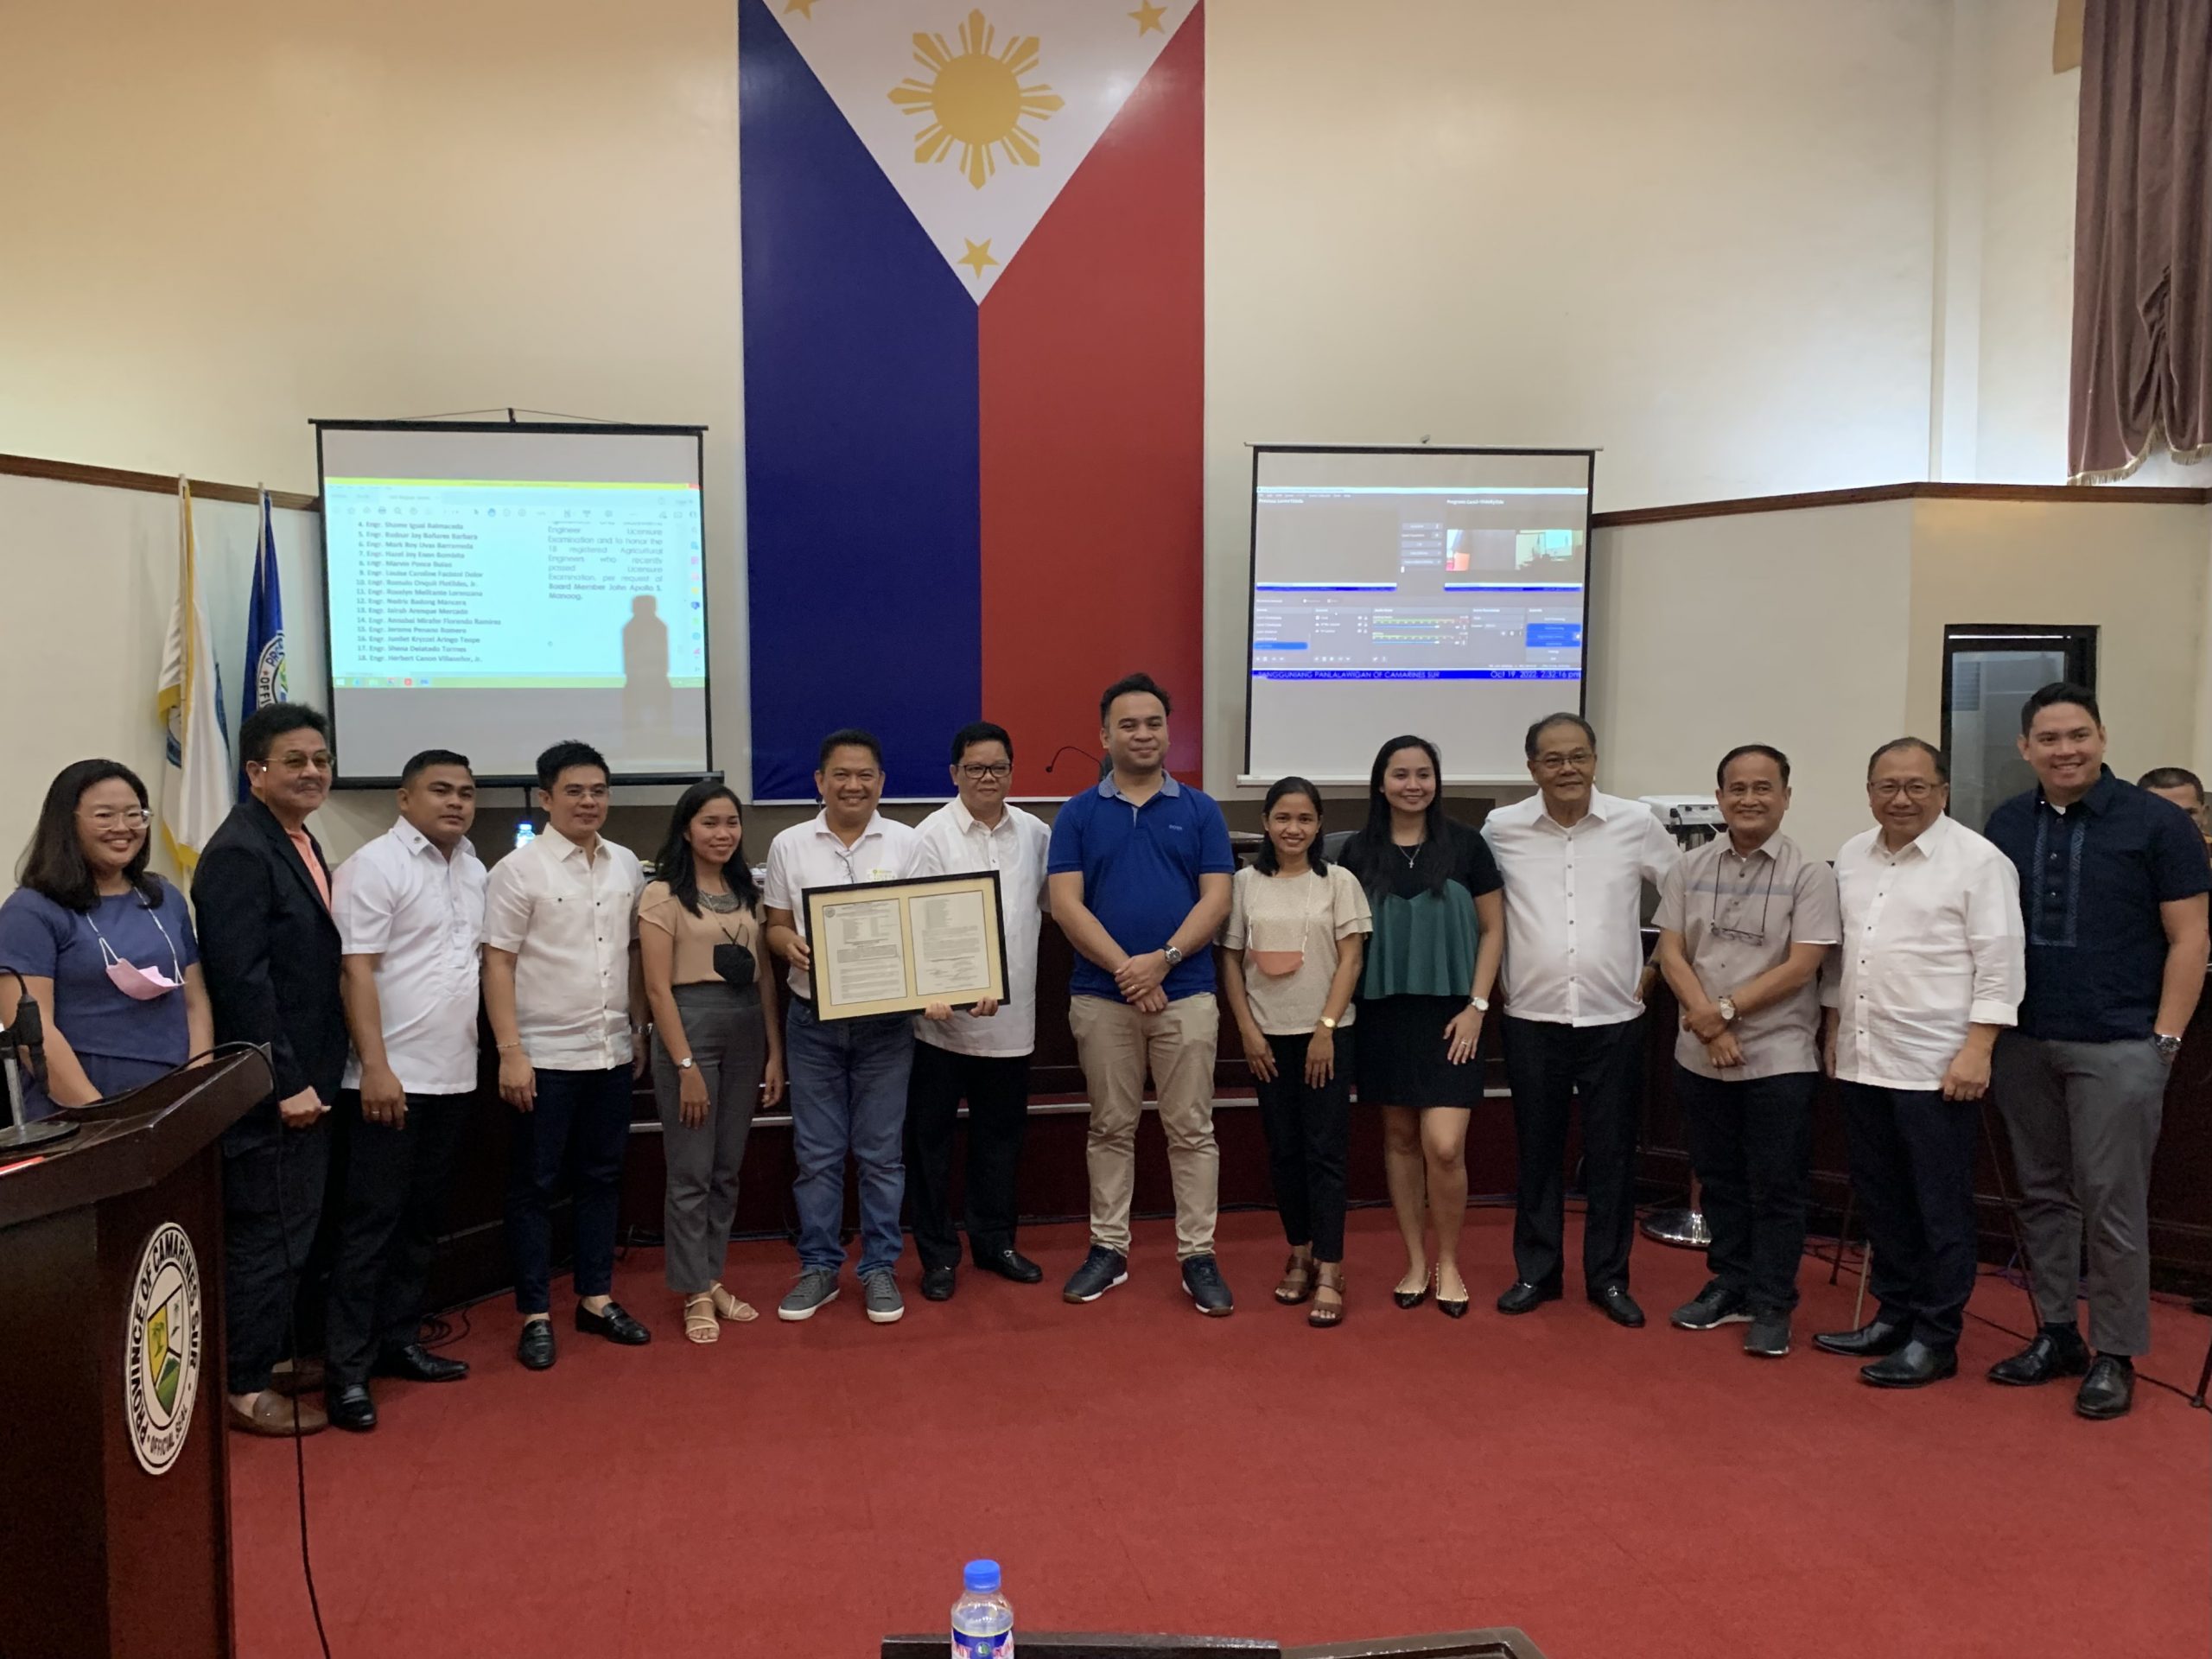 SANGGUNIANG PANLALAWIGAN CONFERS RESOLUTION OF COMMENDATION TO CBSUA, ABLE 2022 PASSERS